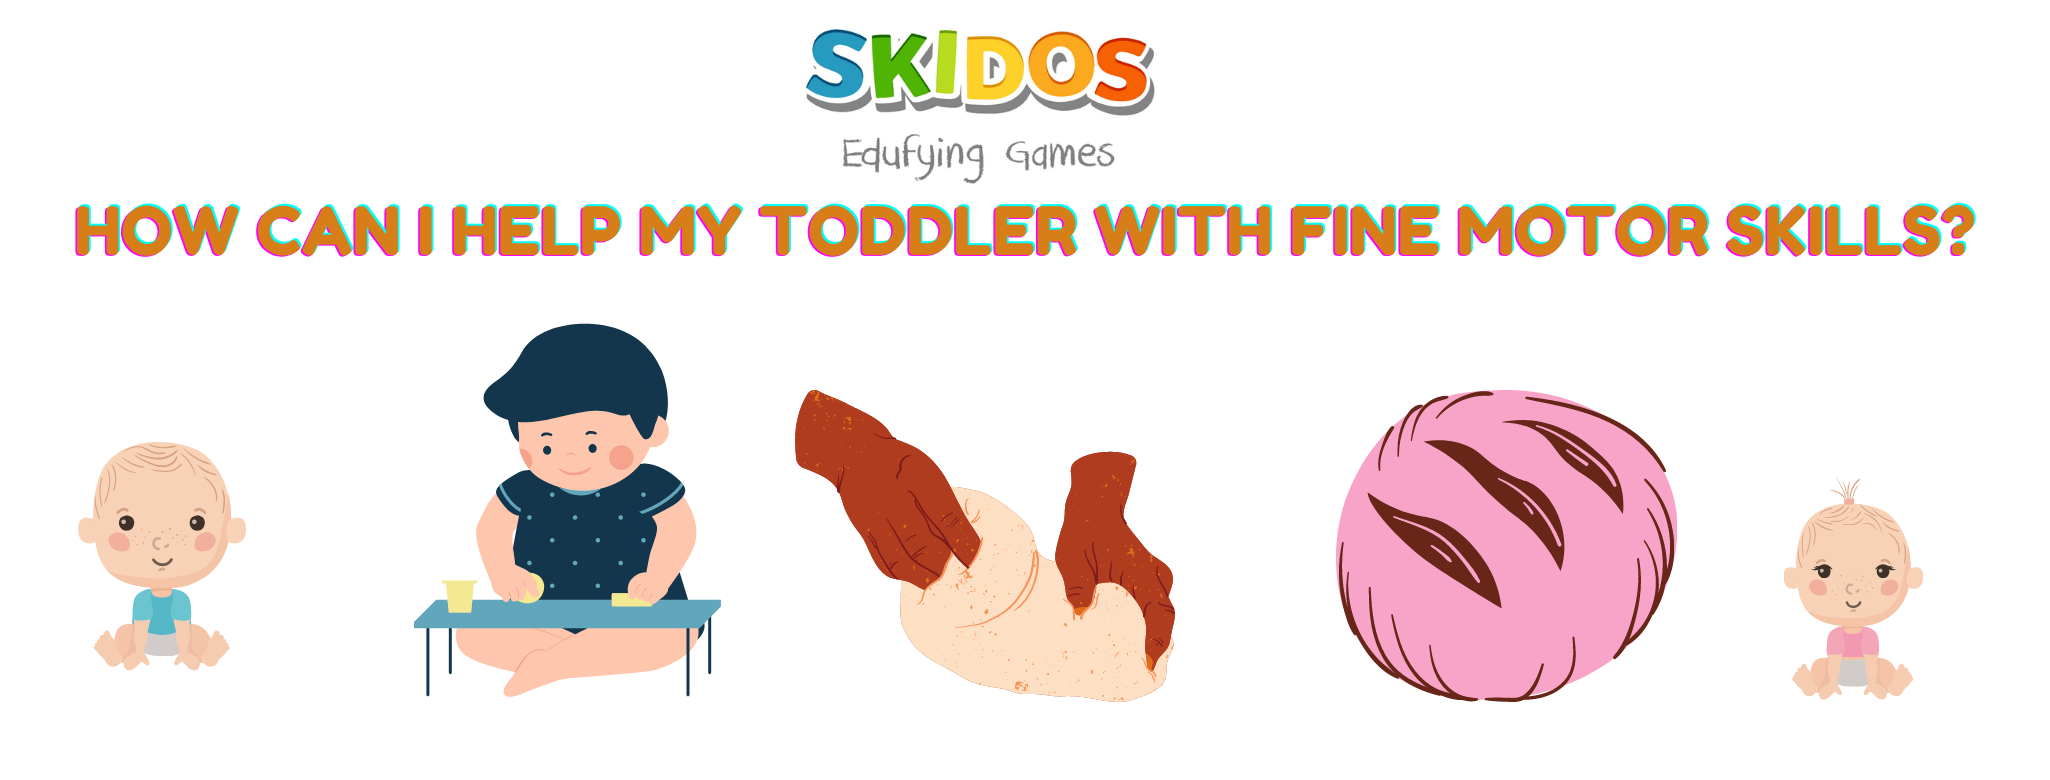 How can I help my toddler with fine motor skills